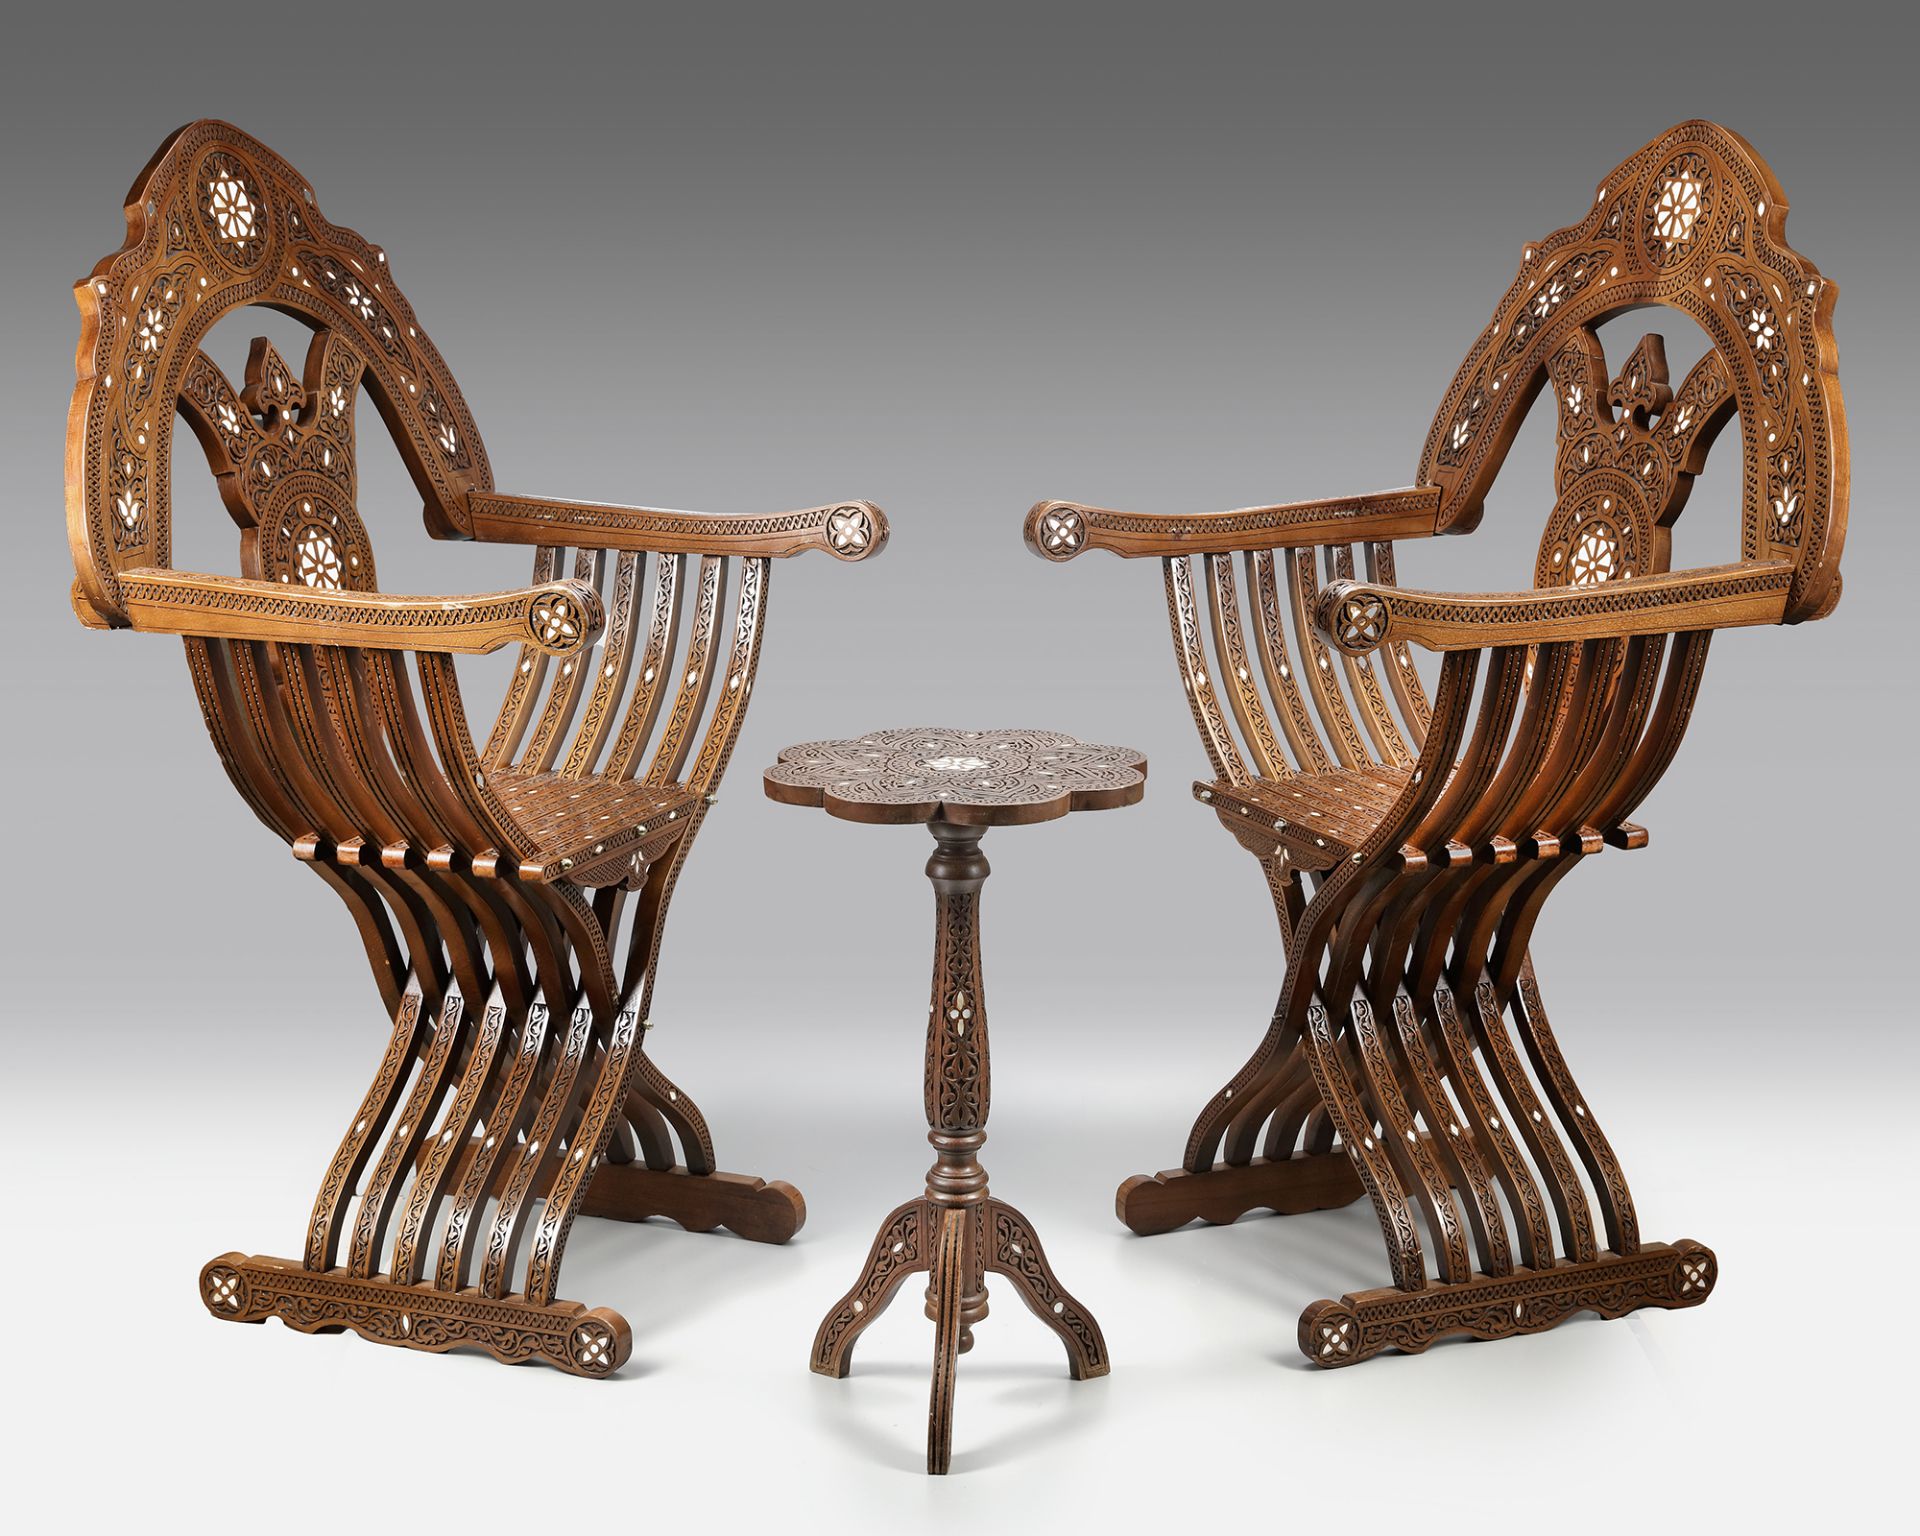 A PAIR OF SYRIAN MOTHER OF PEARL INLAID FOLDING CHAIRS AND A TABLE, LATE 19TH CENTURY - Bild 2 aus 3